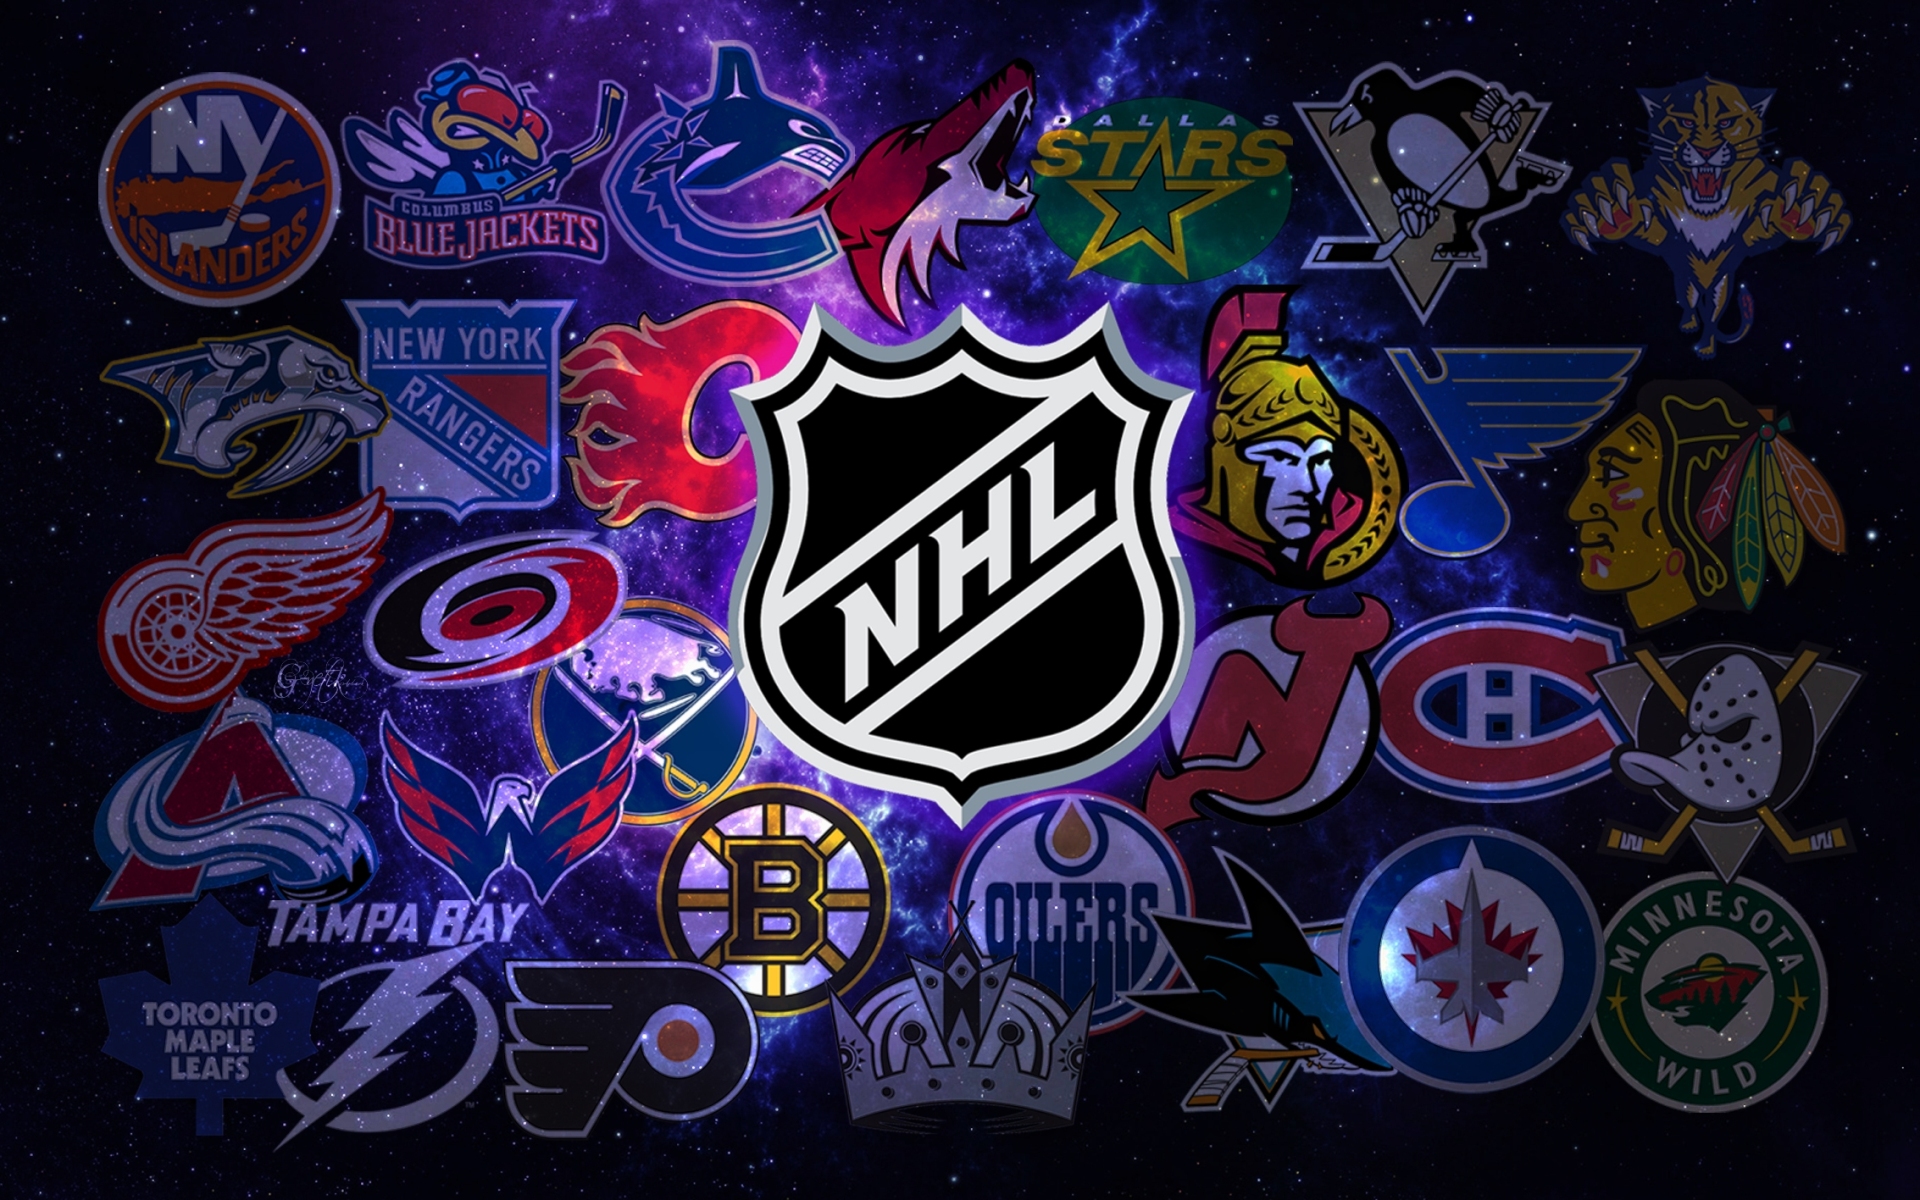 Share This Awesome Nhl Hockey Wallpaper On